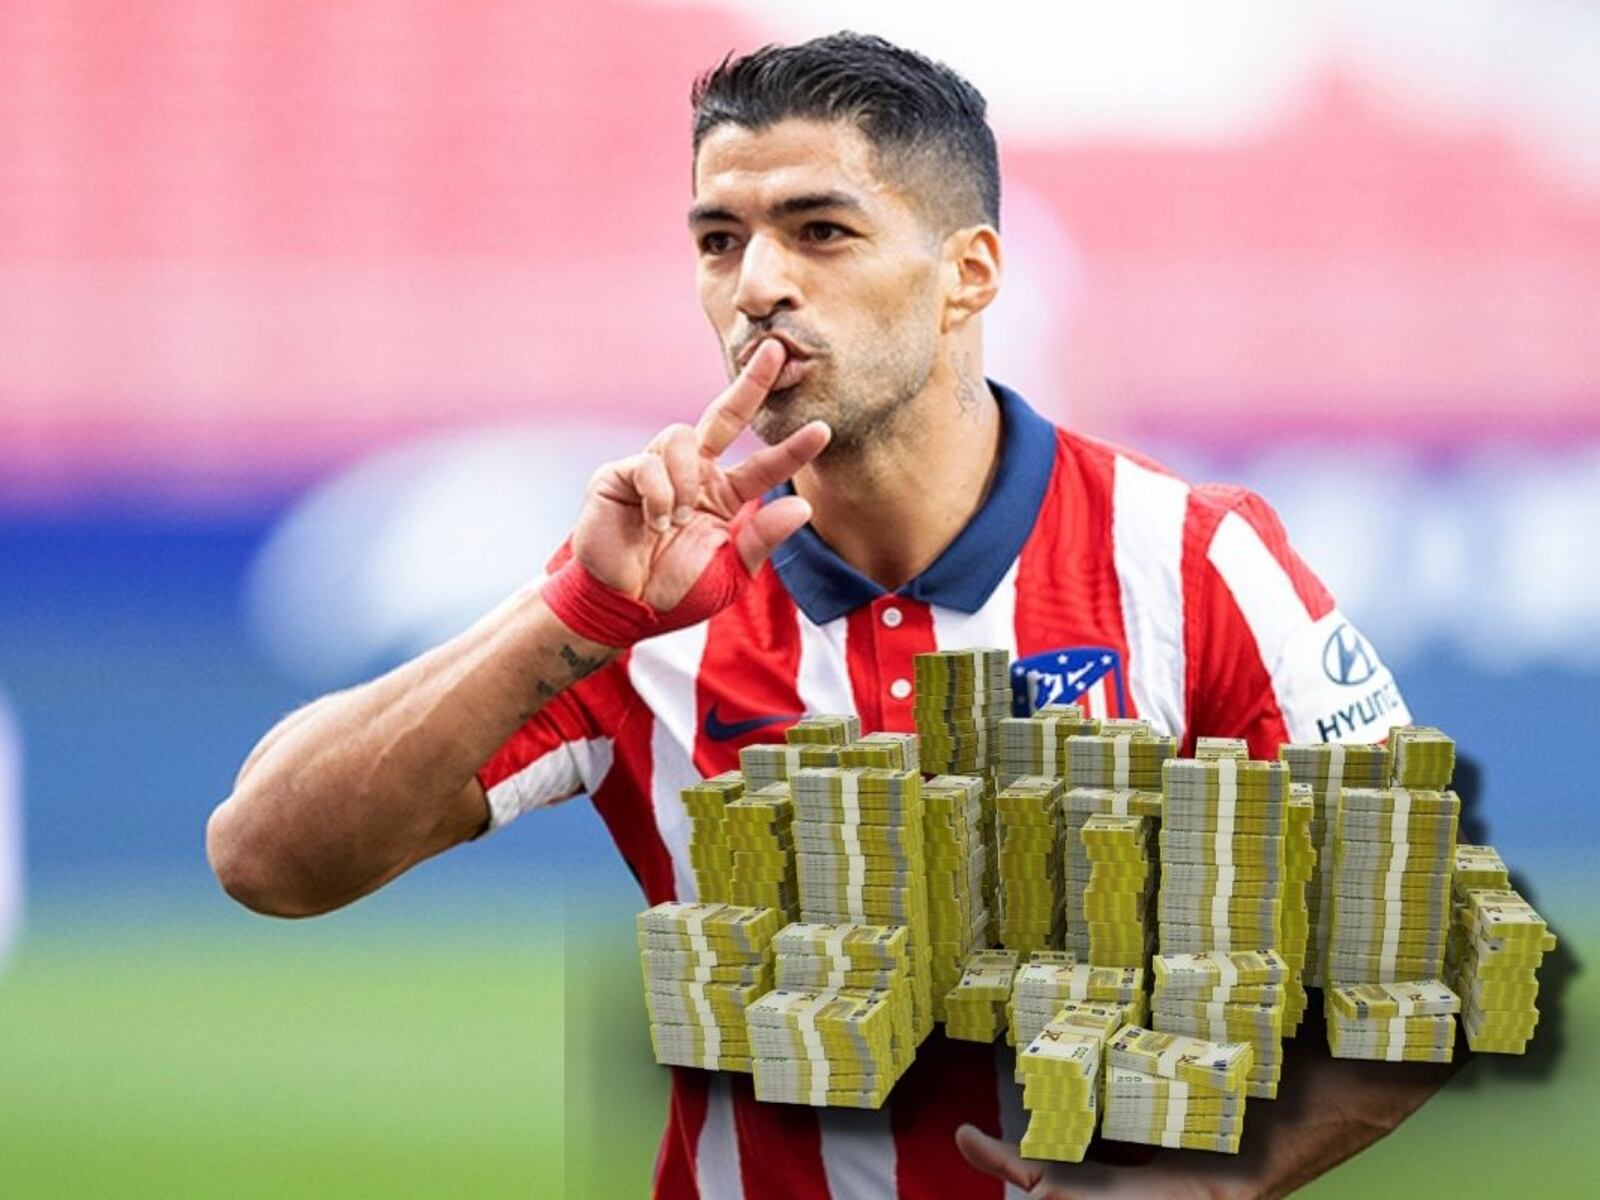 They call him the new Suárez, he is worth 2 million and dreams of playing for Atleti